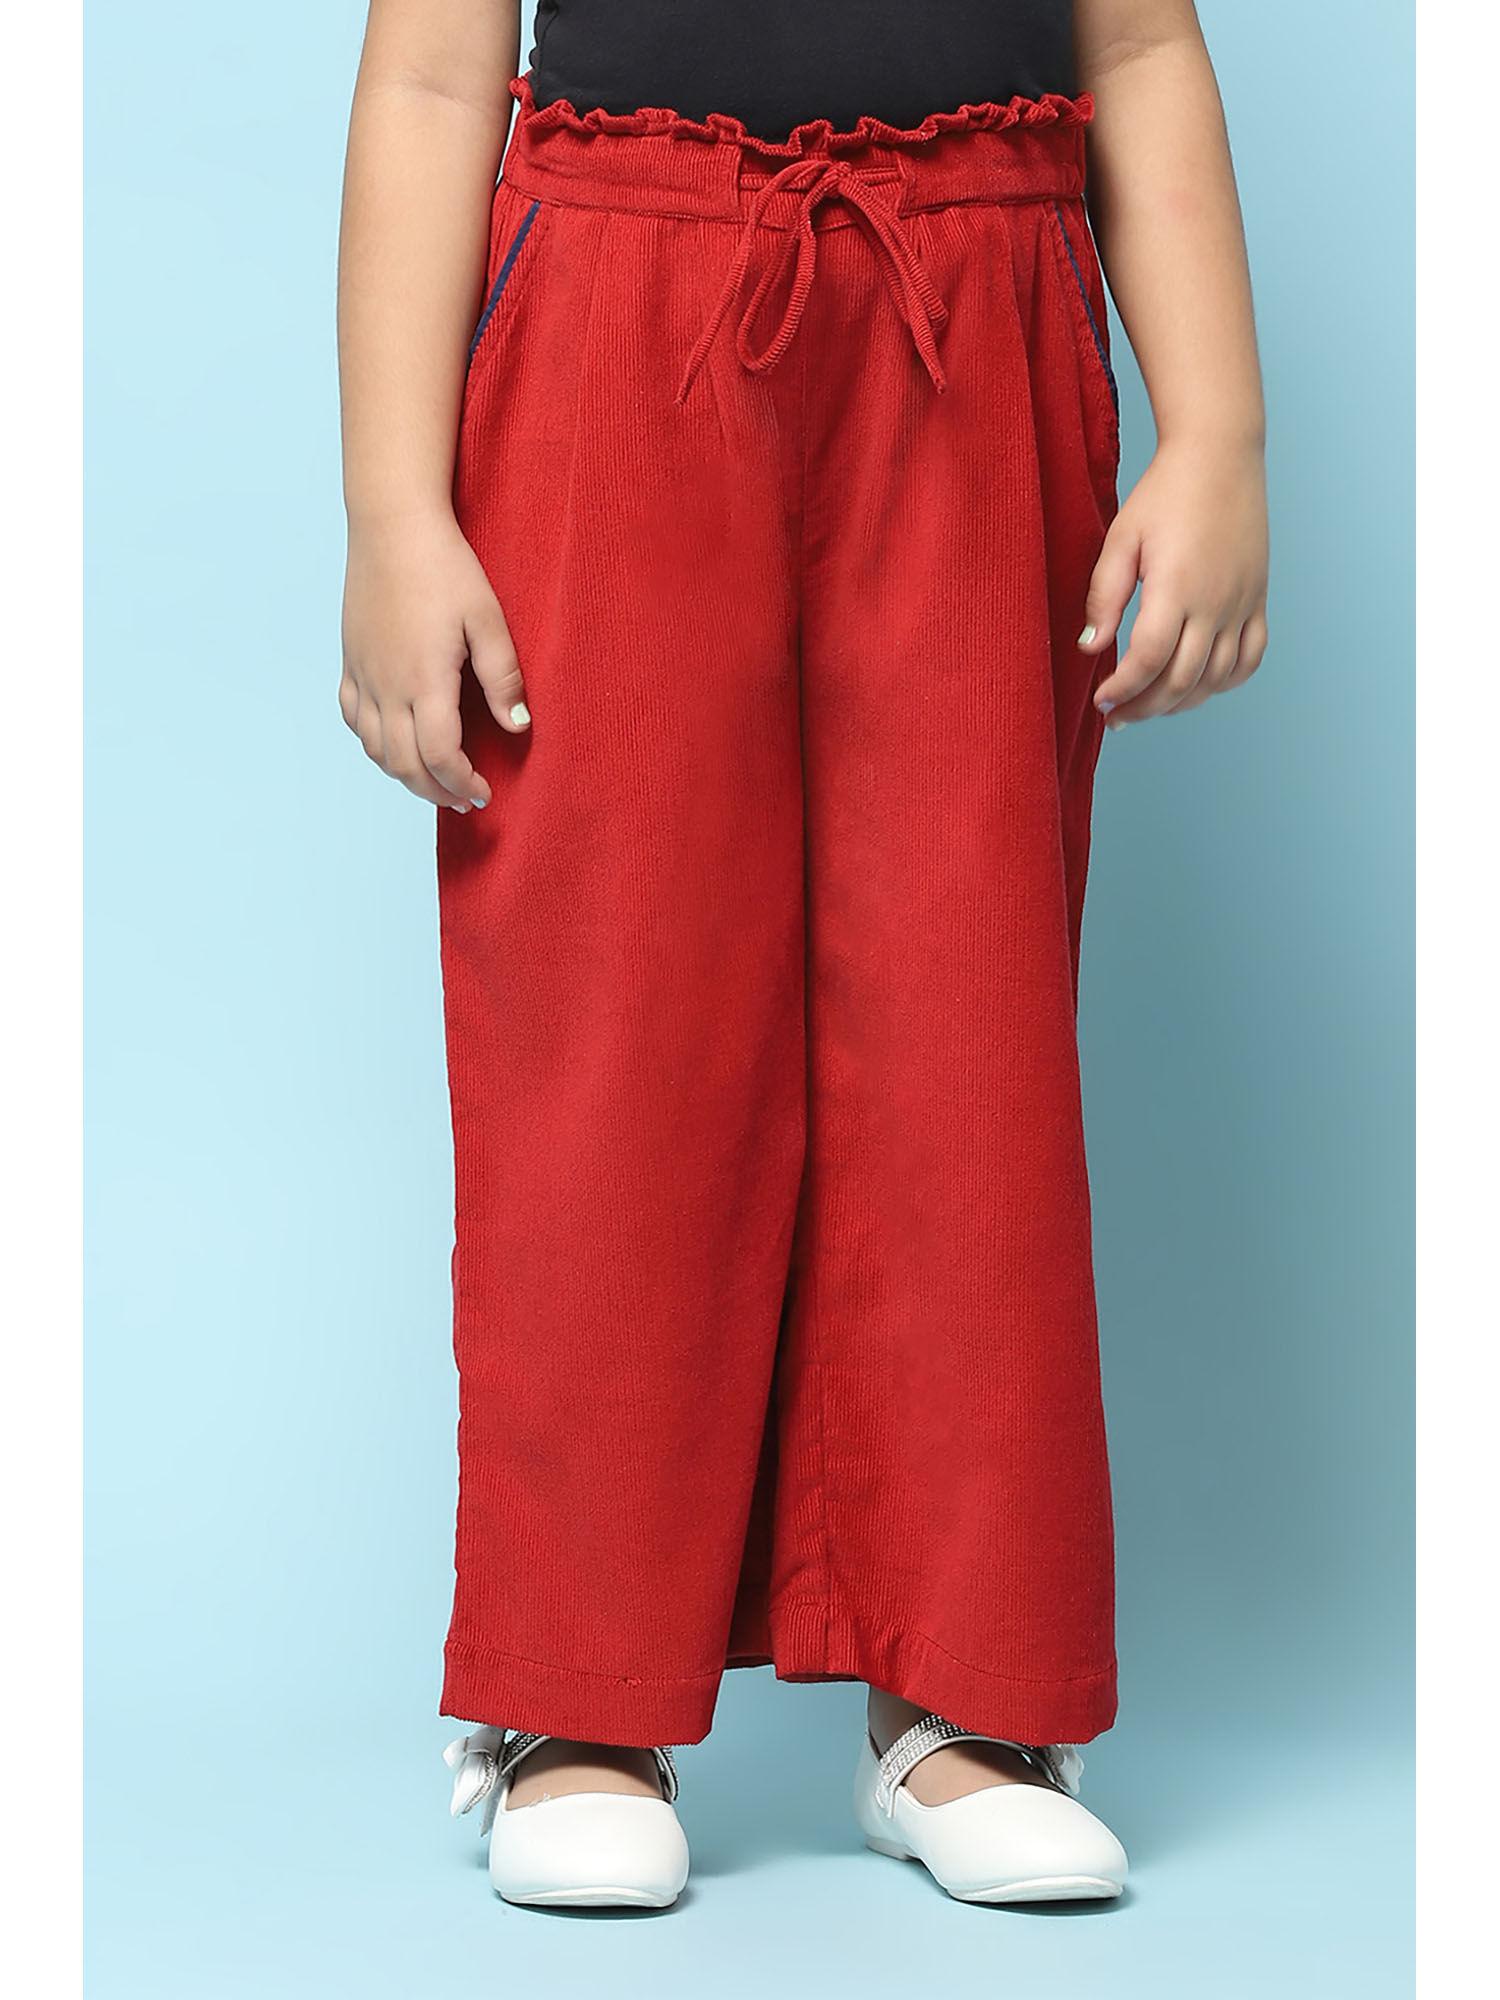 rust doby solid mid rise pant